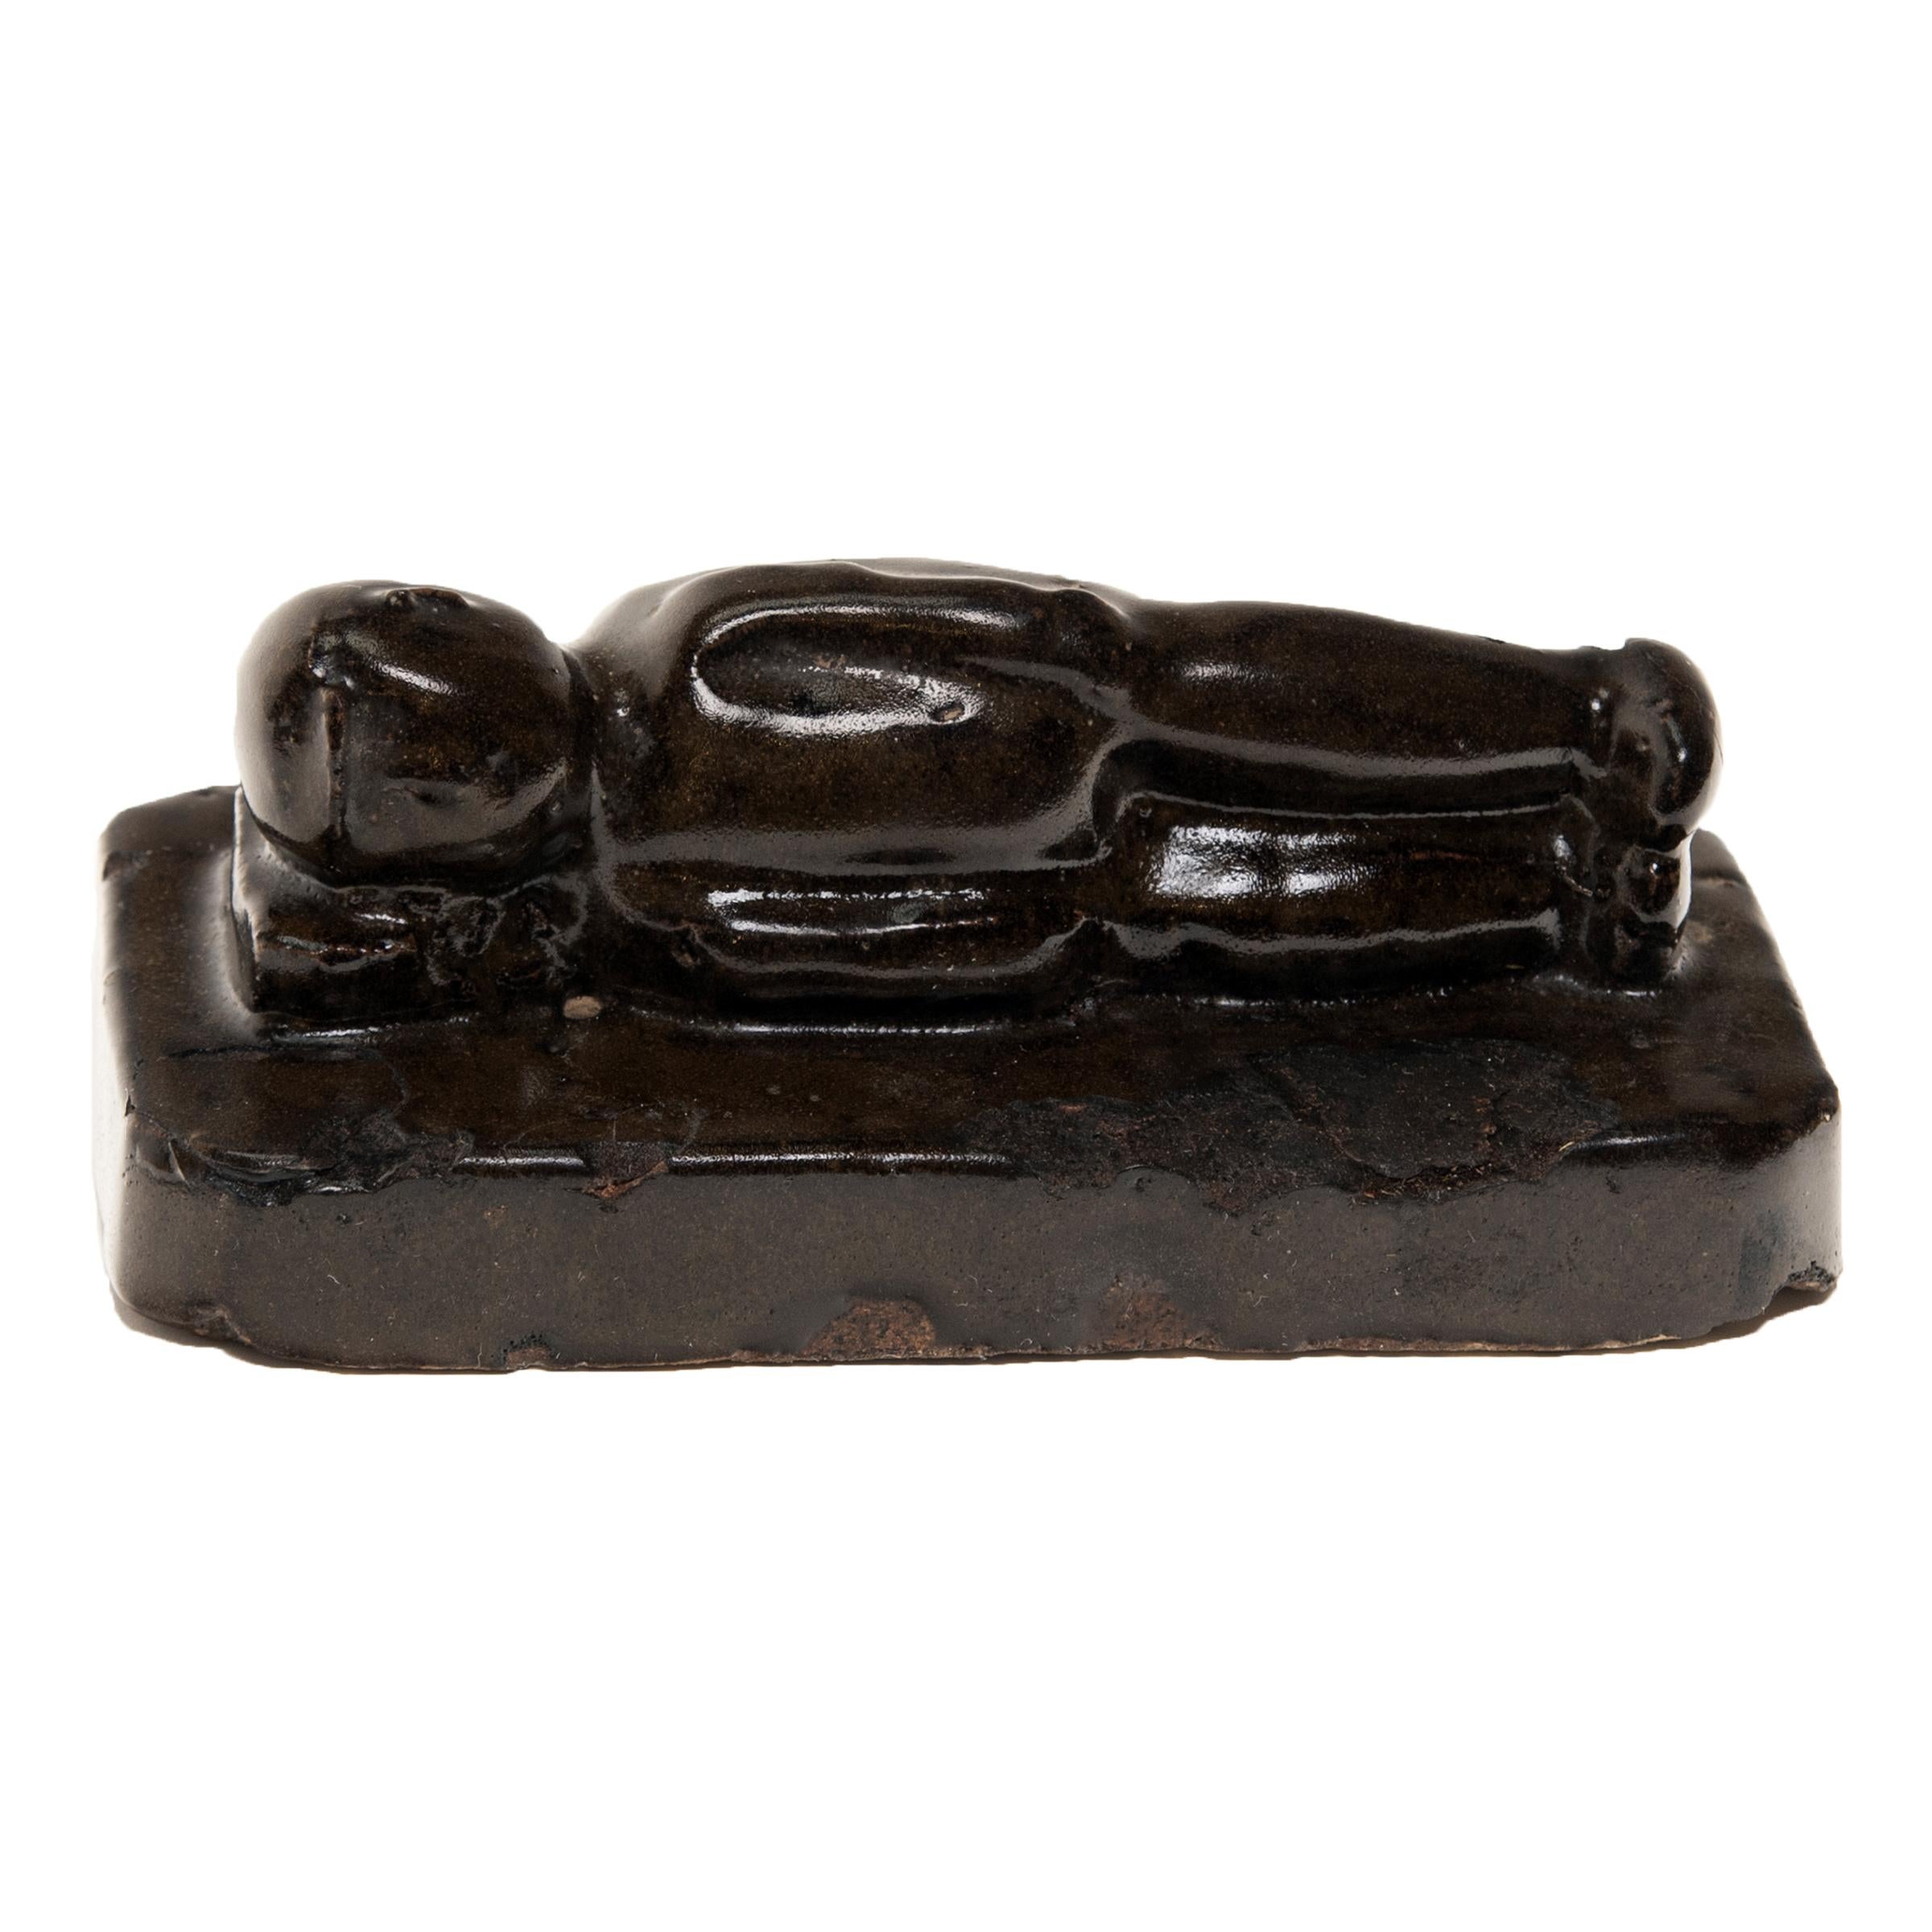 This 19th century weight originally used its heft domestically to protect a child. A simple yet ingenious concept, the stone anchored the baby’s swaddling cloth to the bed so the child wouldn’t roll out. The handle of this glazed ceramic weight is